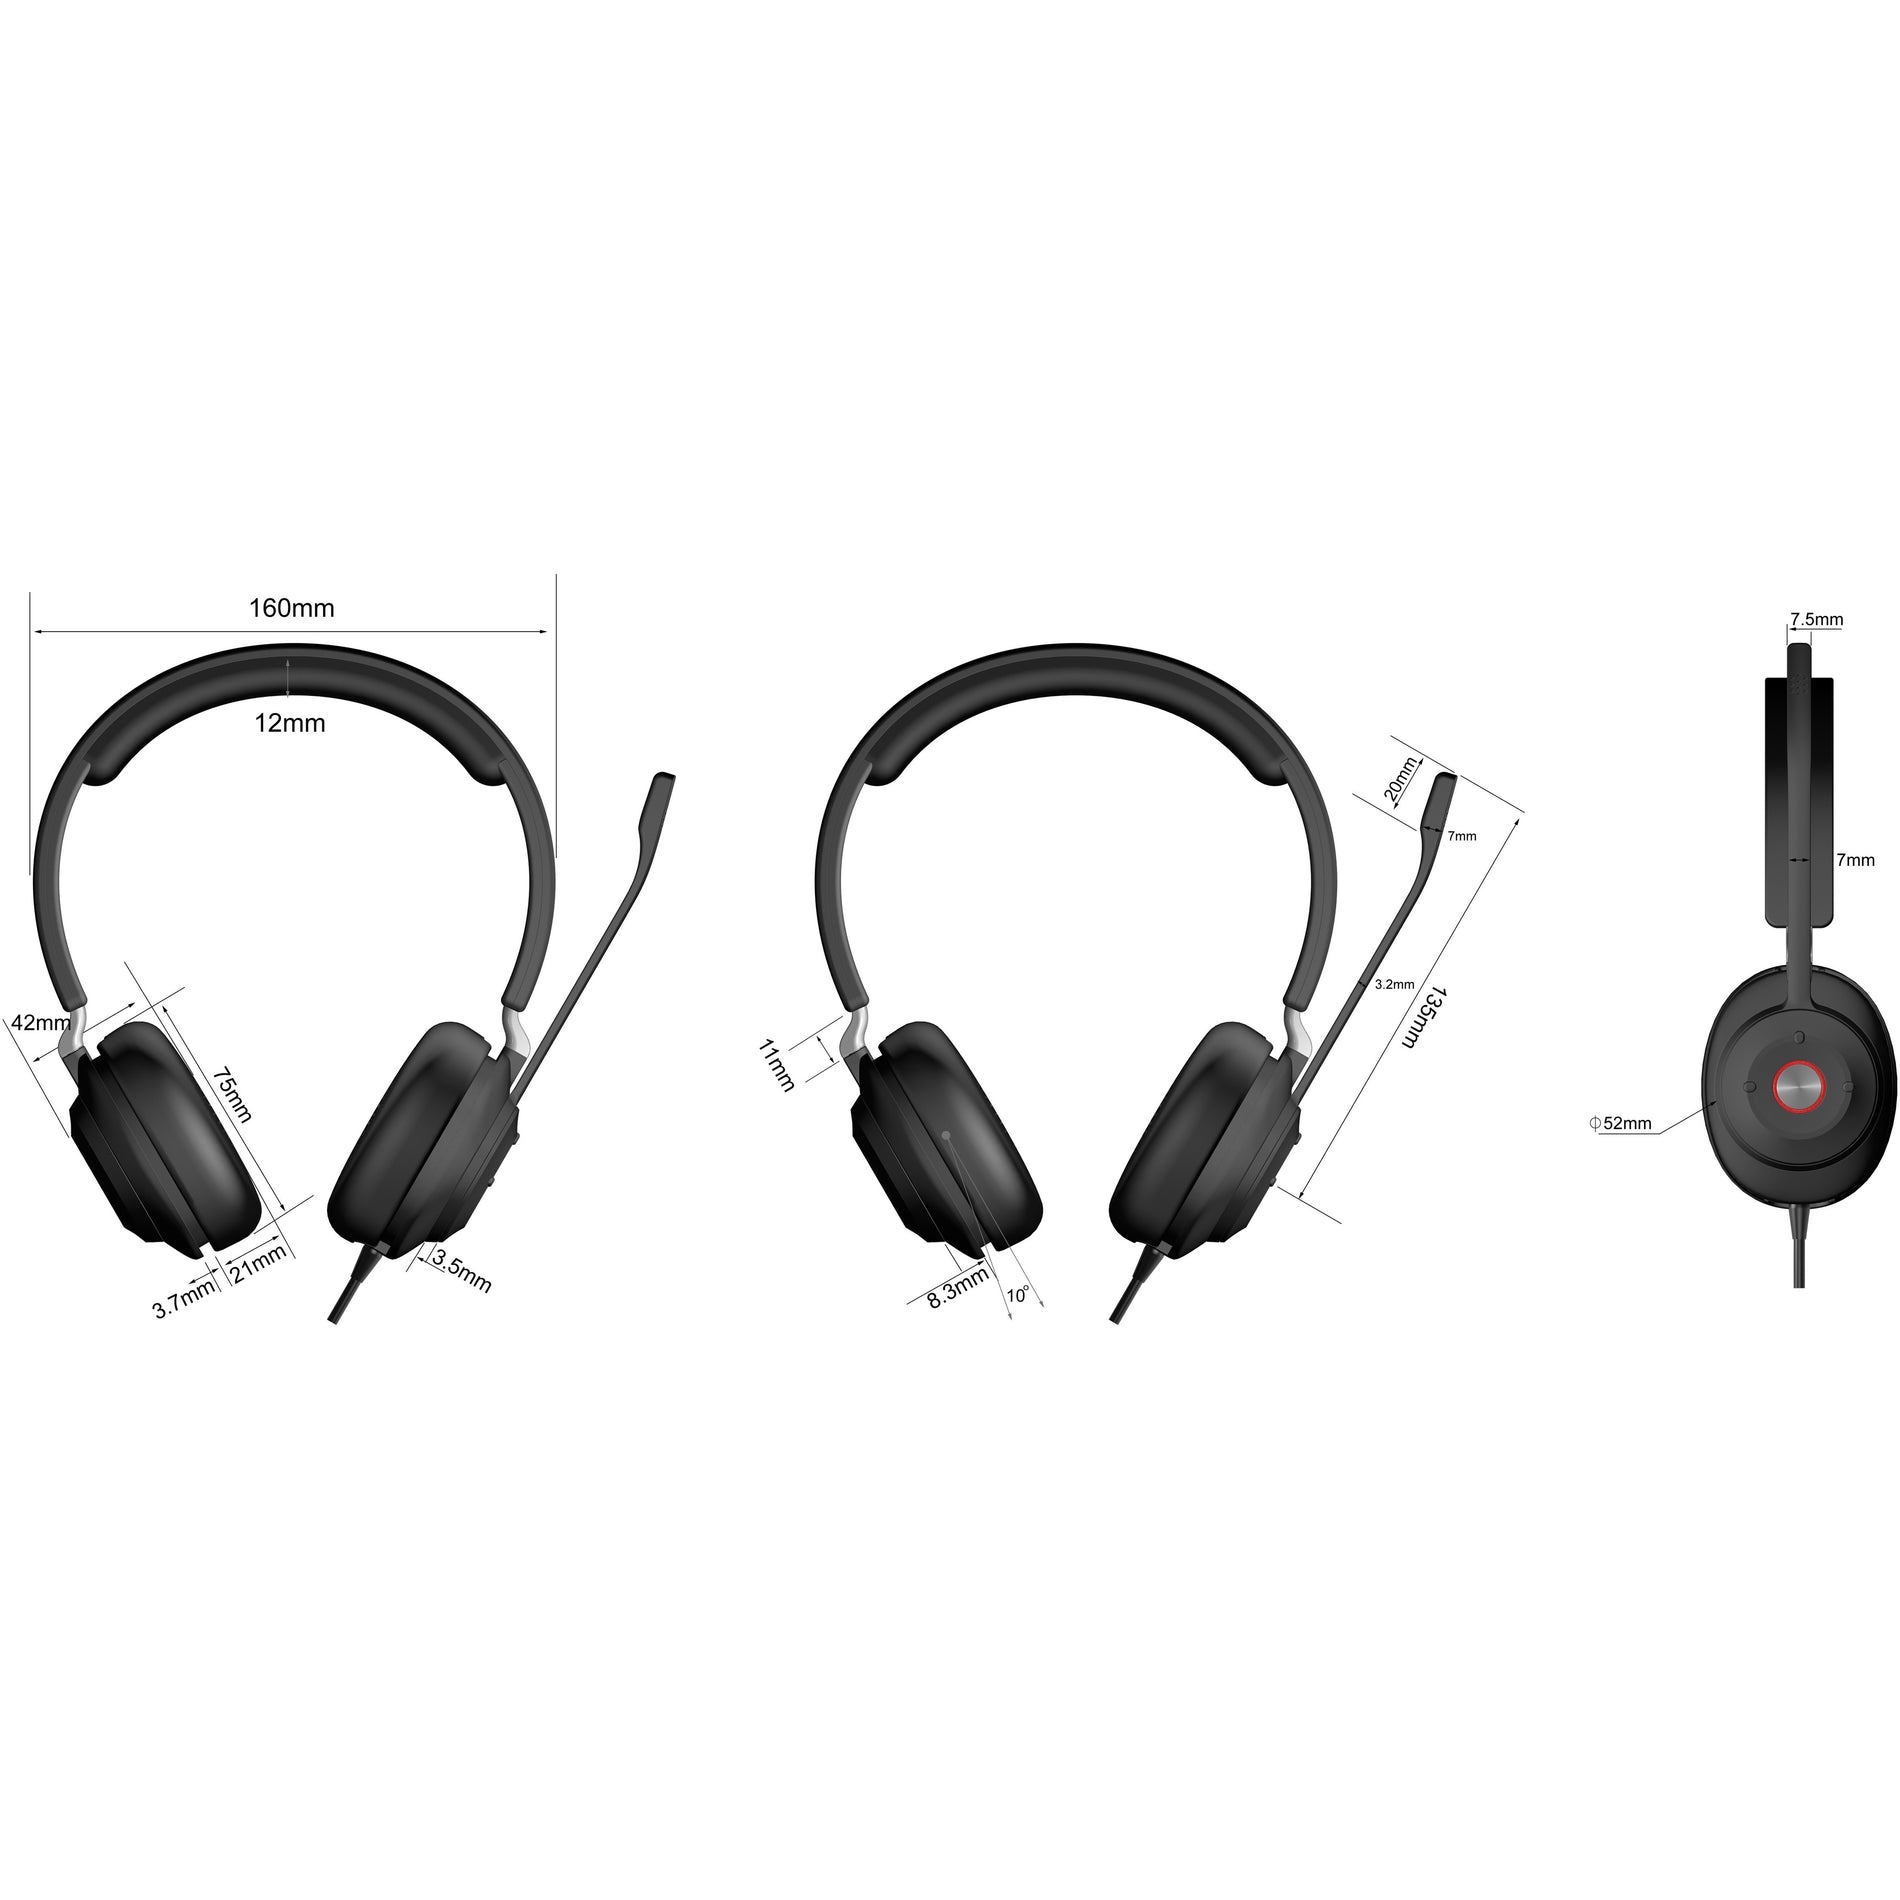 Cyber Acoustics HS-2000 Essential USB Computer Headset, Tangle-free Cable, Secure Fit, Passive Noise Cancellation